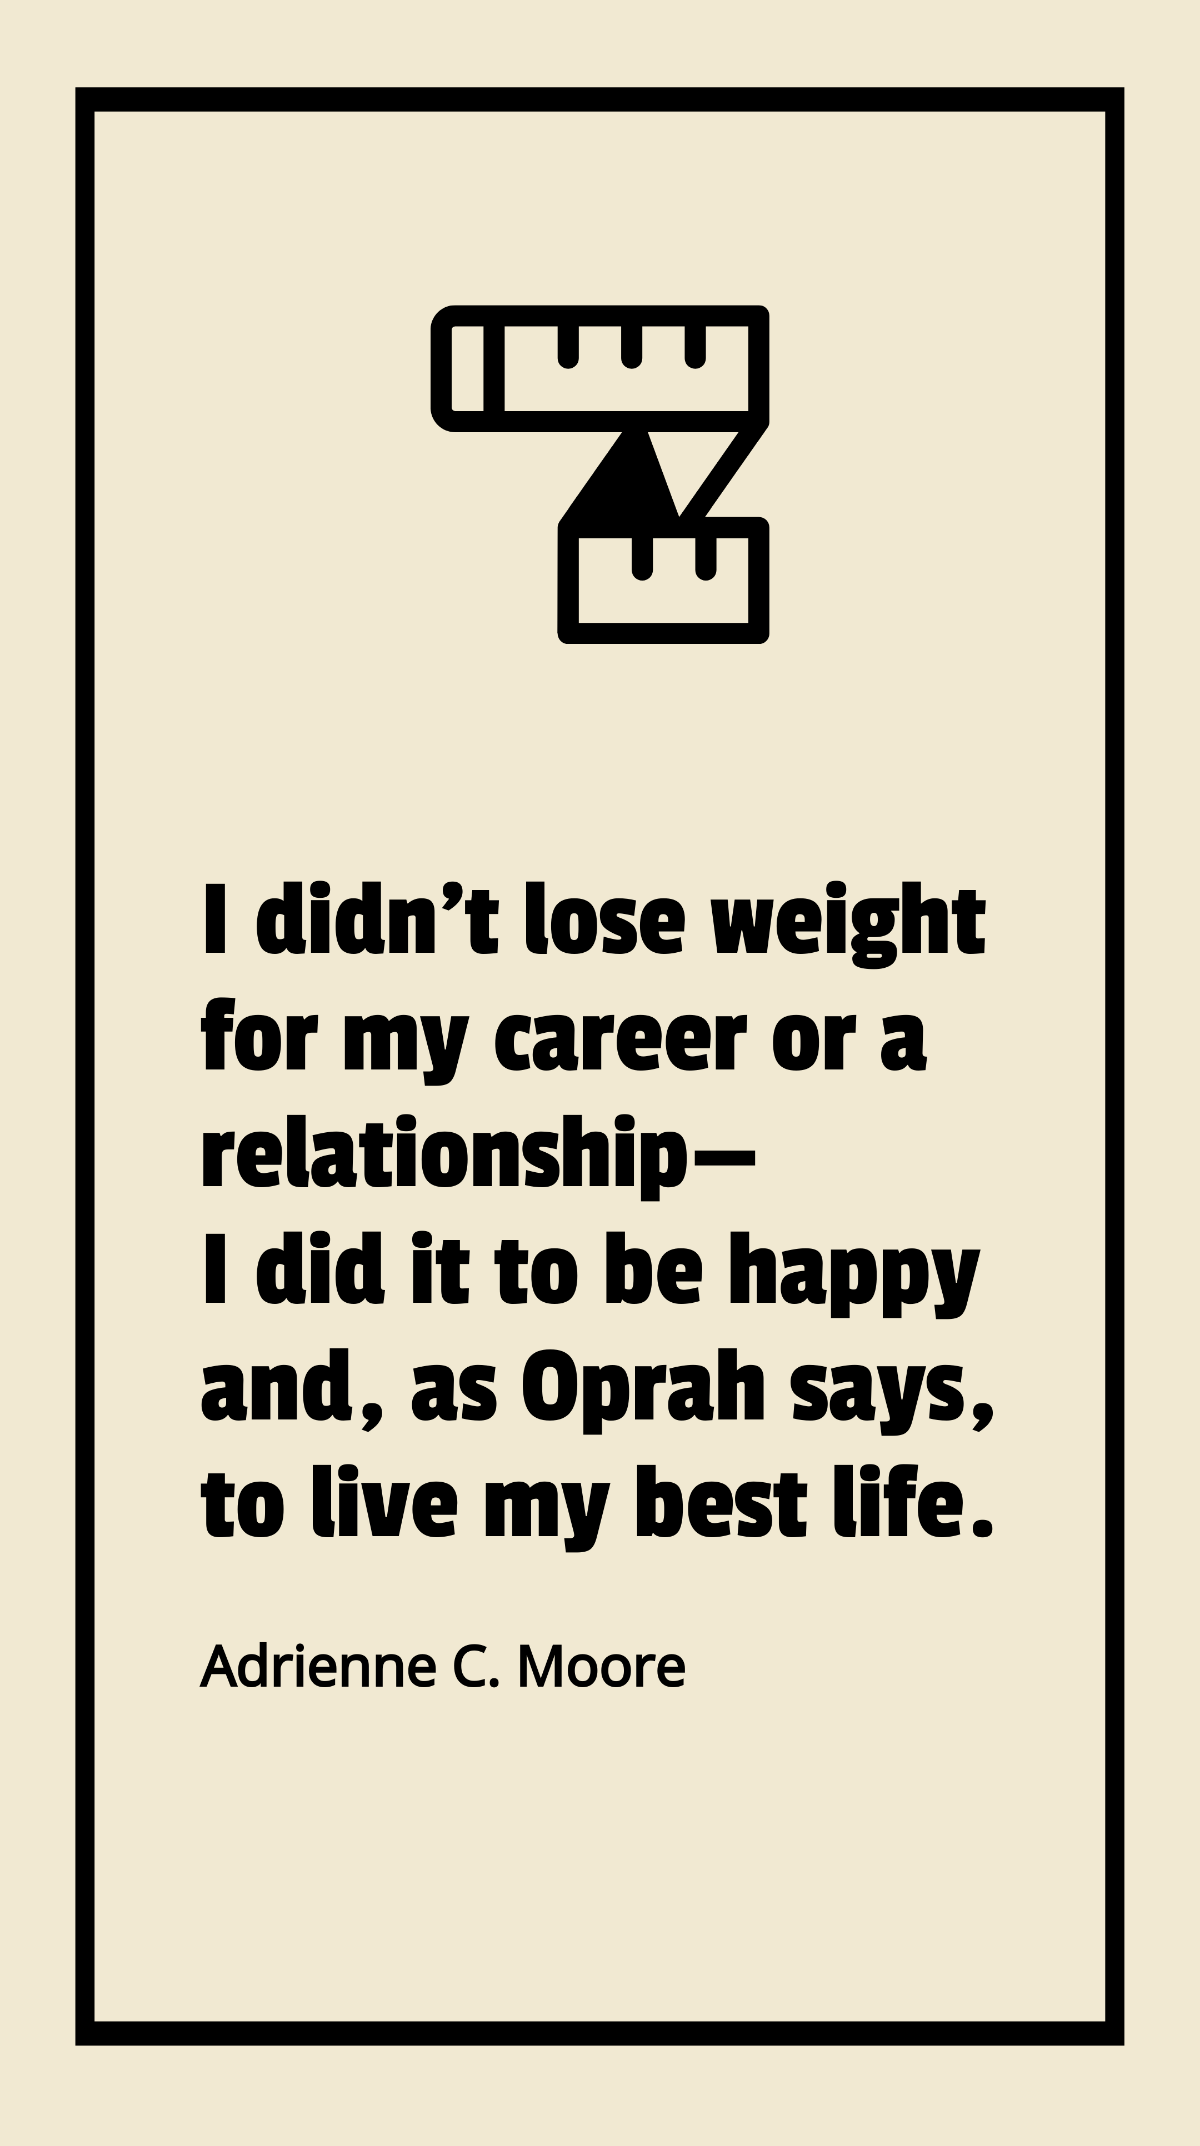 Adrienne C. Moore - I didn't lose weight for my career or a relationship - I did it to be happy and, as Oprah says, to live my best life. Template